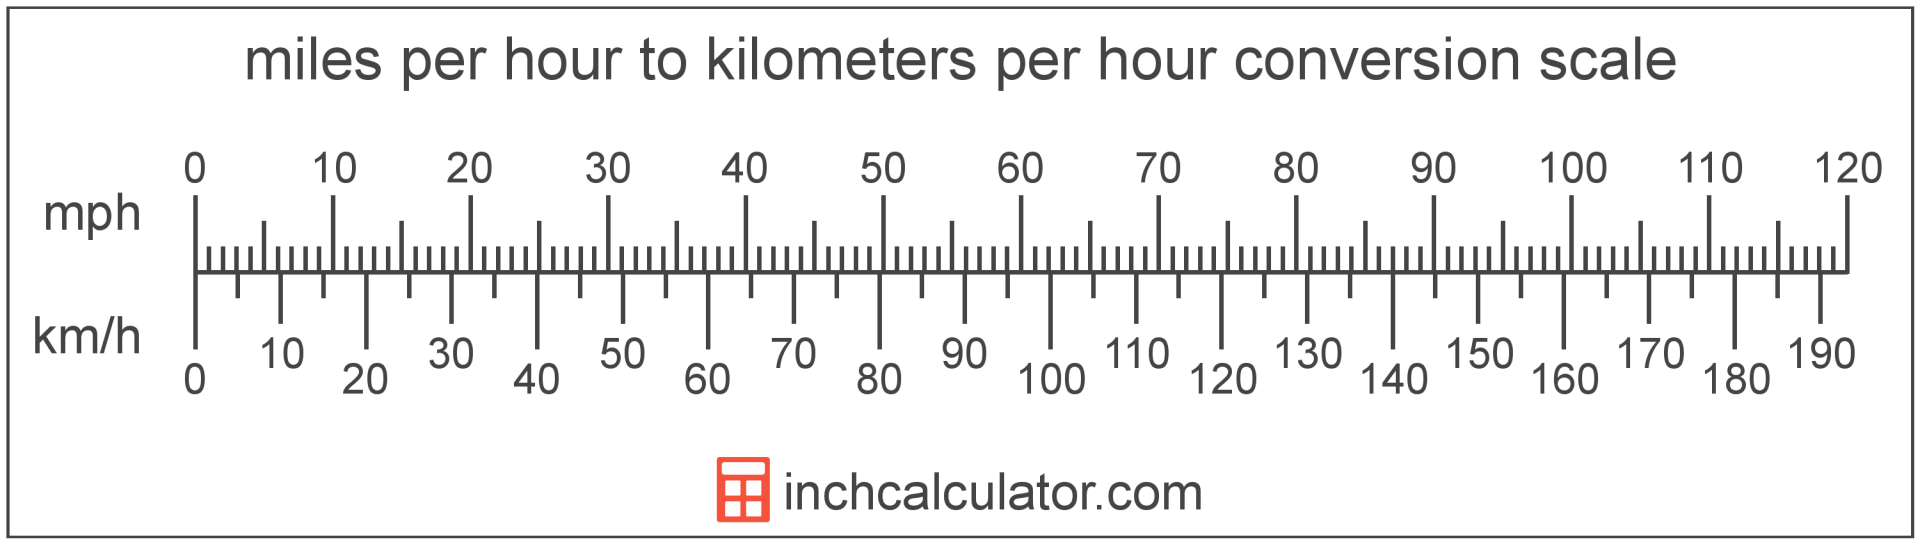 How to Calculate and Convert Mph to Kph: Best and Easiest Ways